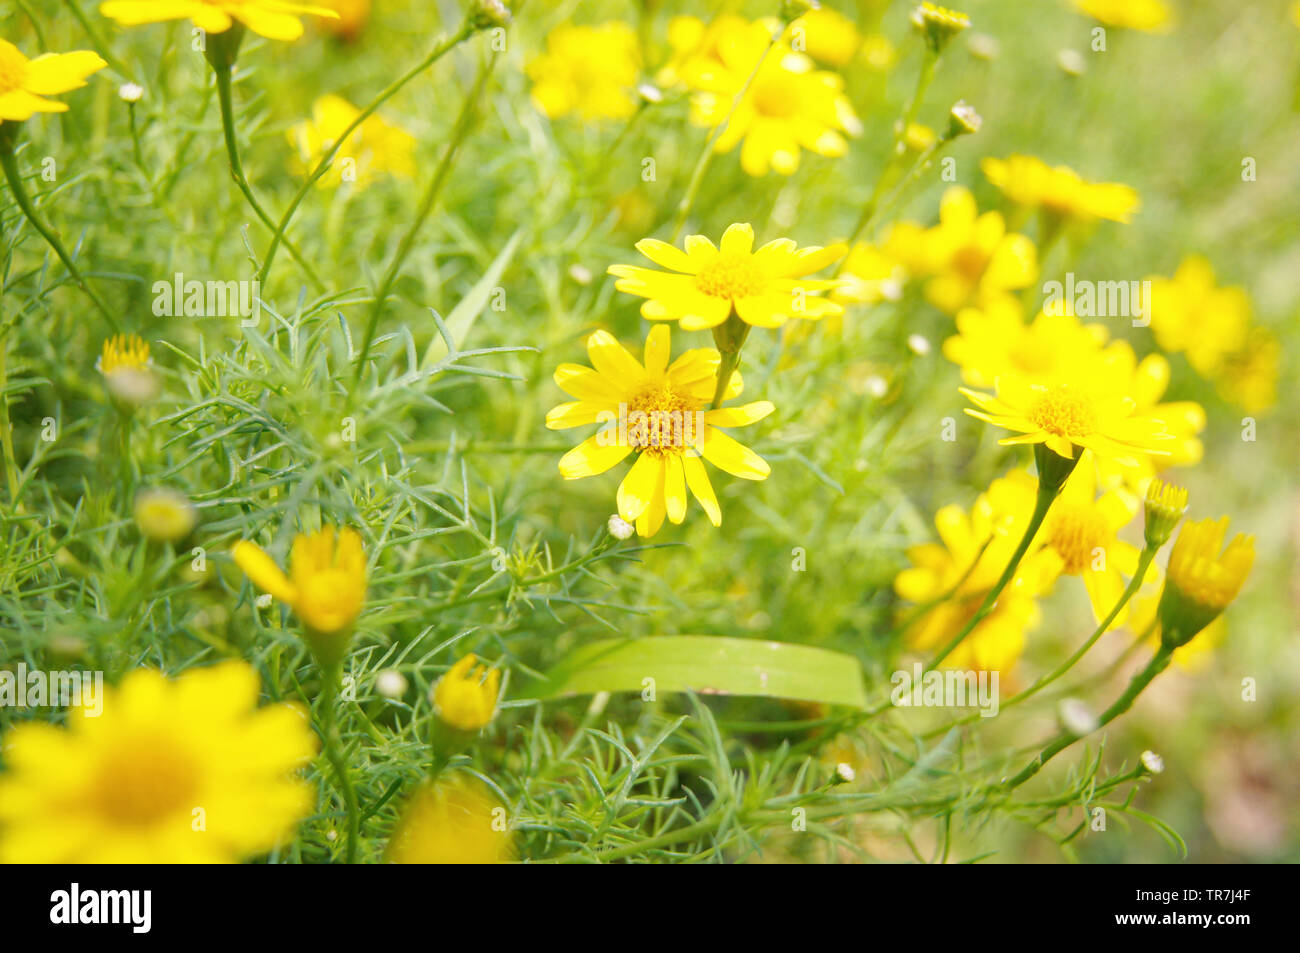 field of yellow wedelia trilobata / Singapore daisy flower Asteraceae in the garden Stock Photo